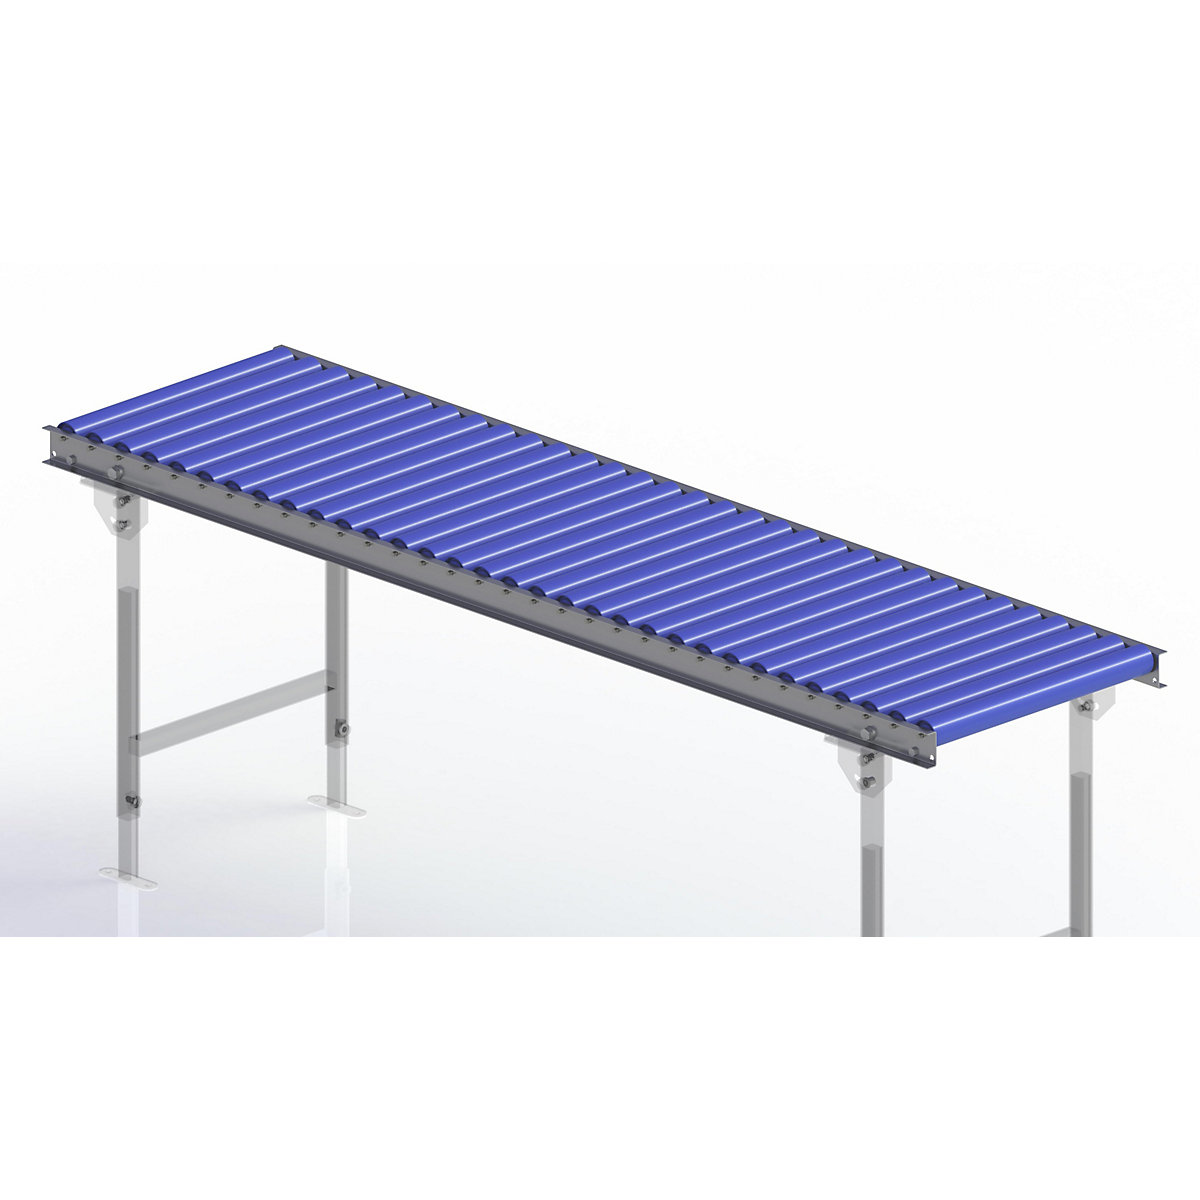 Gura – Light duty roller conveyor, steel frame with plastic rollers, track width 500 mm, axle spacing 62.5 mm, length 2.0 m